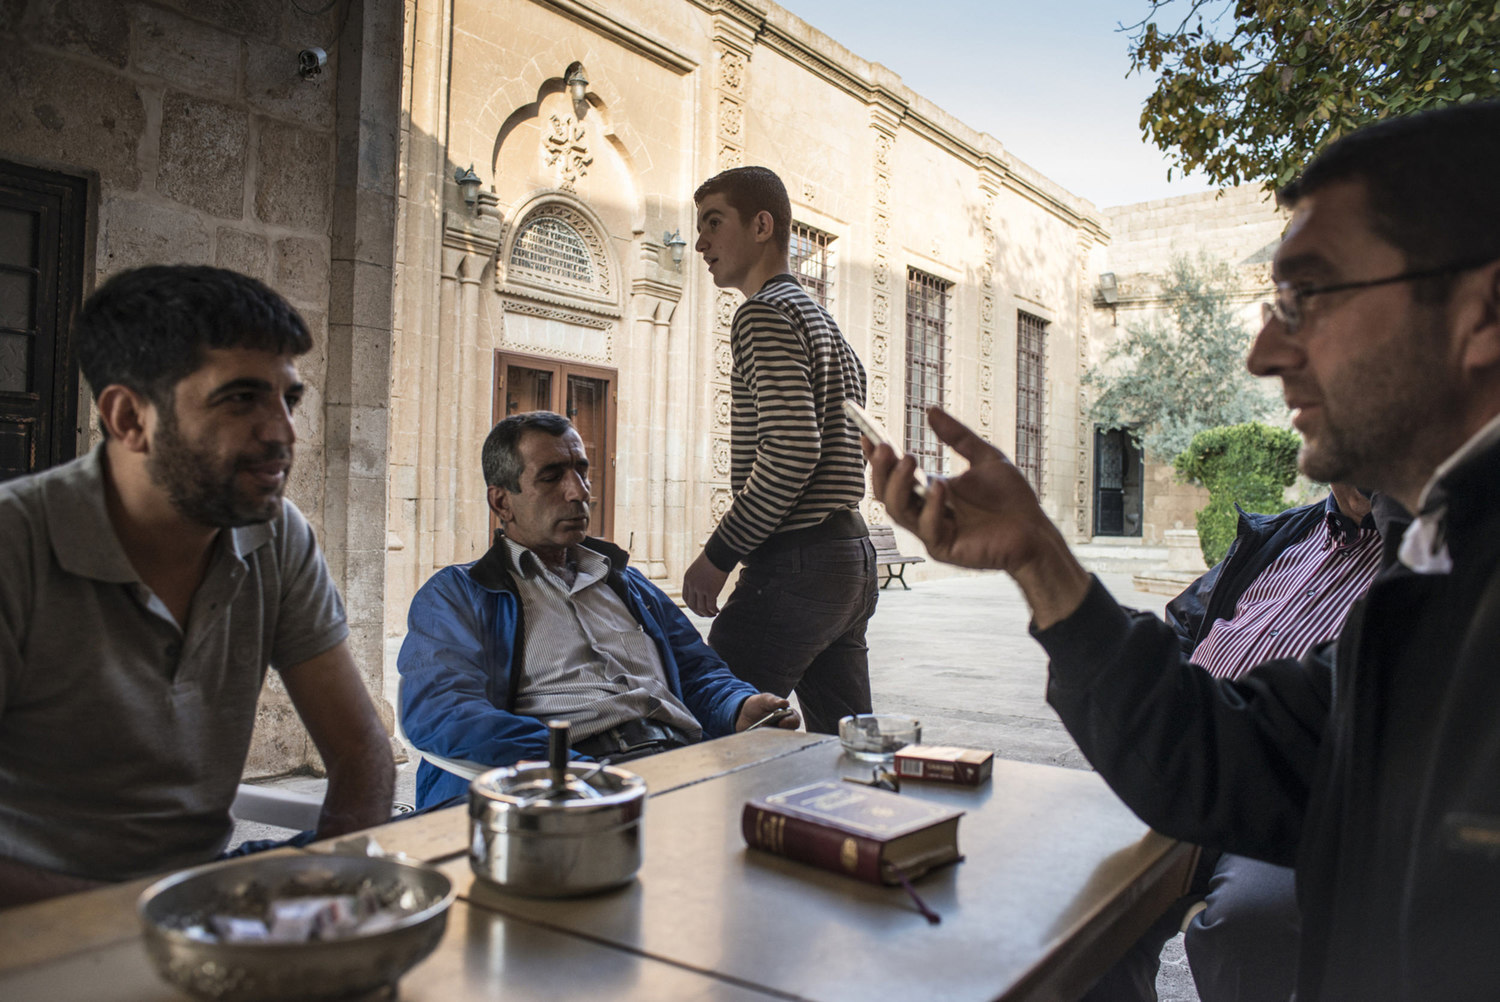  Decon  Ayhan Gürkan,(r) speaks to locals in the cortyard of Mor Barsaumo before teaching an Aramaic lesson on October 30th, 2014.

The Mor Barsaumo church is over 1,500 years old and was renovated in 1943. It is located 21 Şen Caddessi in Midyat, Tu